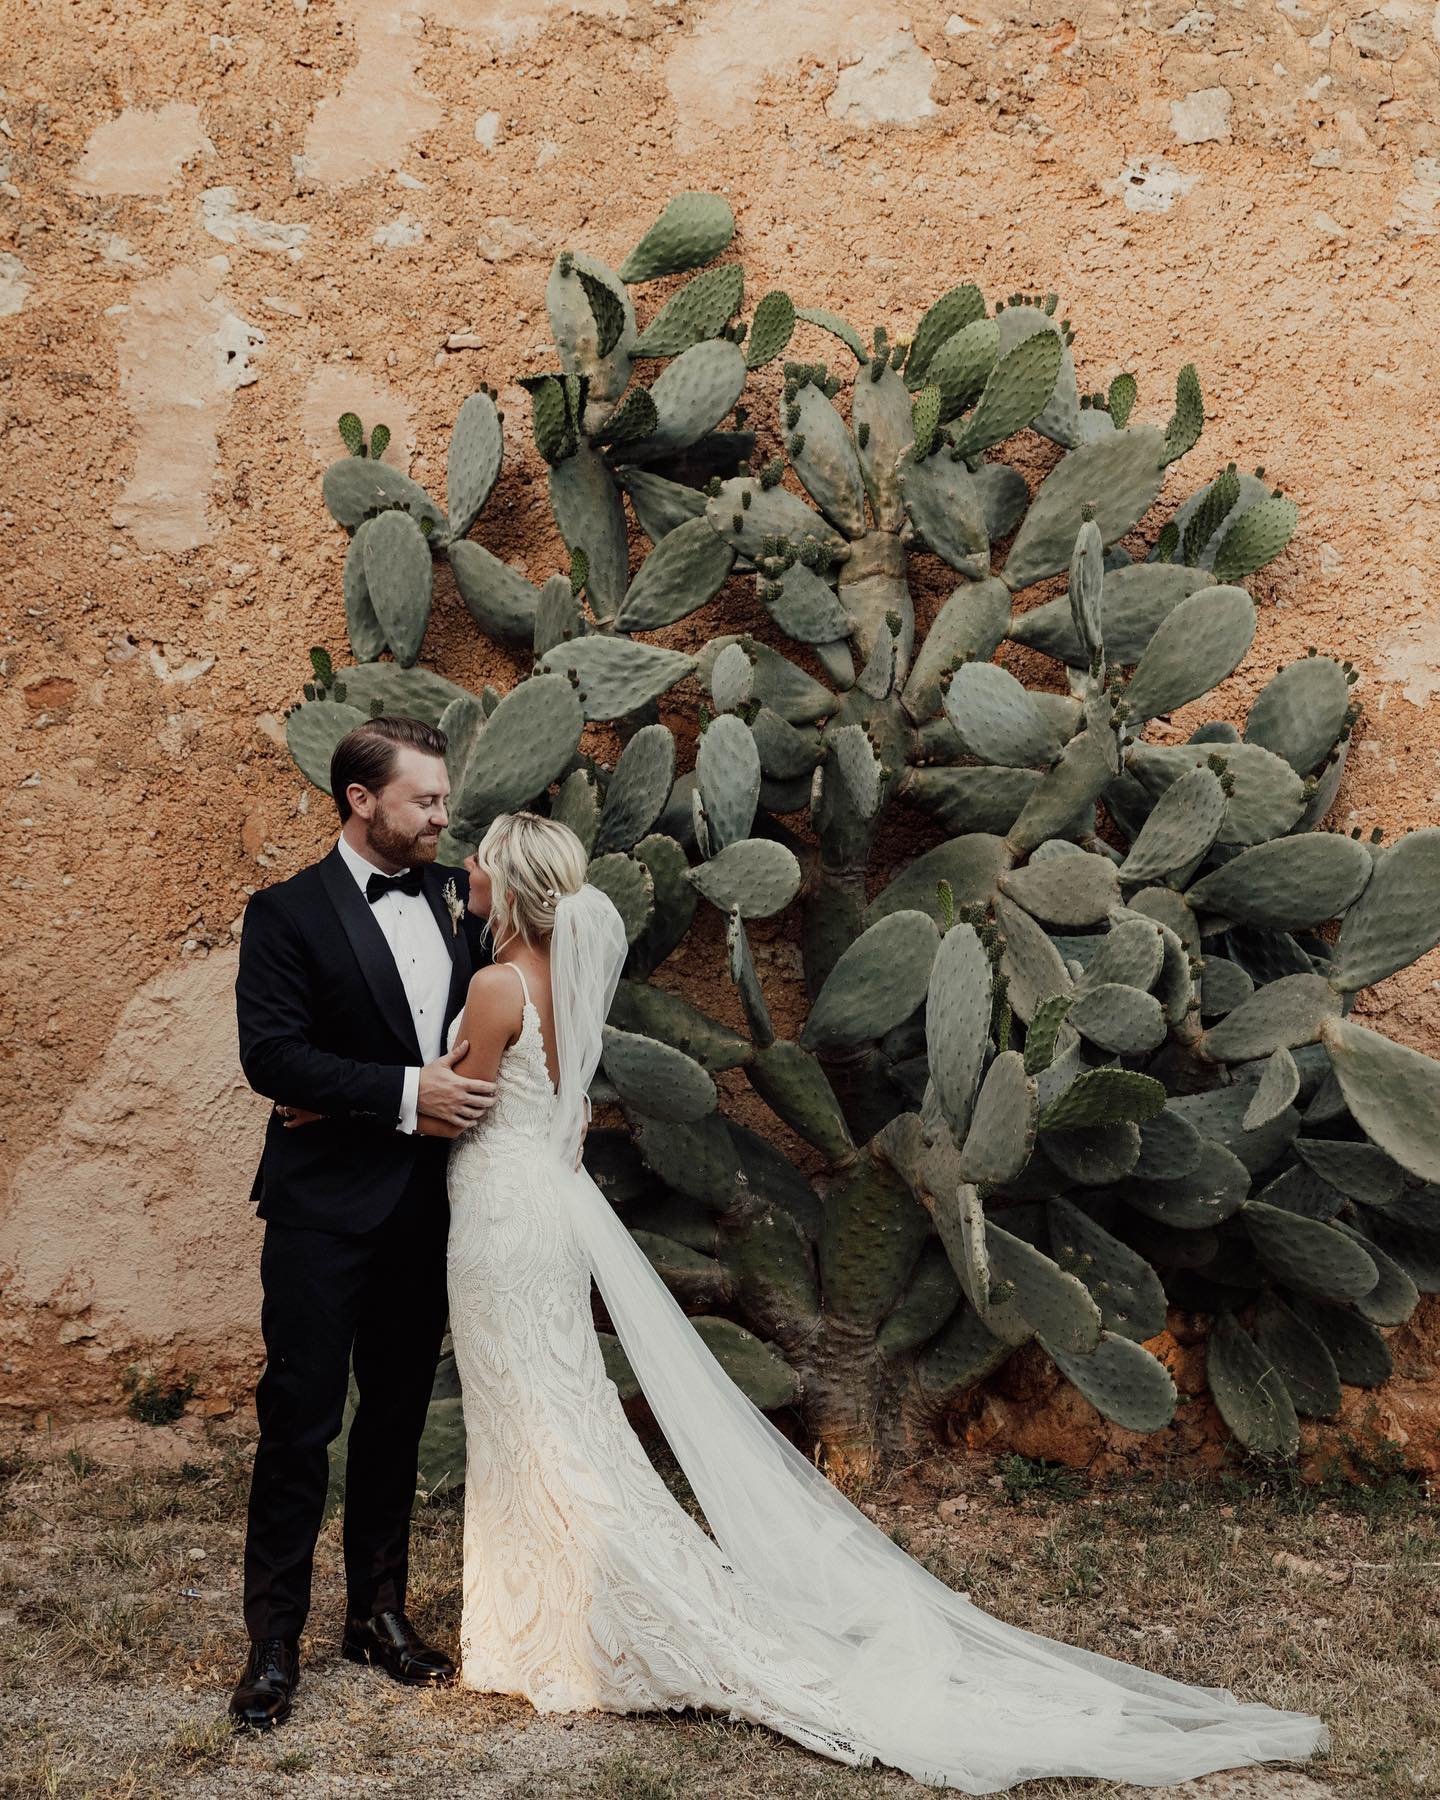 Will travel for love, paella and wine 🍷 

Had the most beautiful 24 hours with Amelia, Jake and their gorgeous family and friends.

Feeling like farm living in Mallorca is now on the dream board 🇪🇸 

Dress - @prettywhitedressbride by @madilanebrid